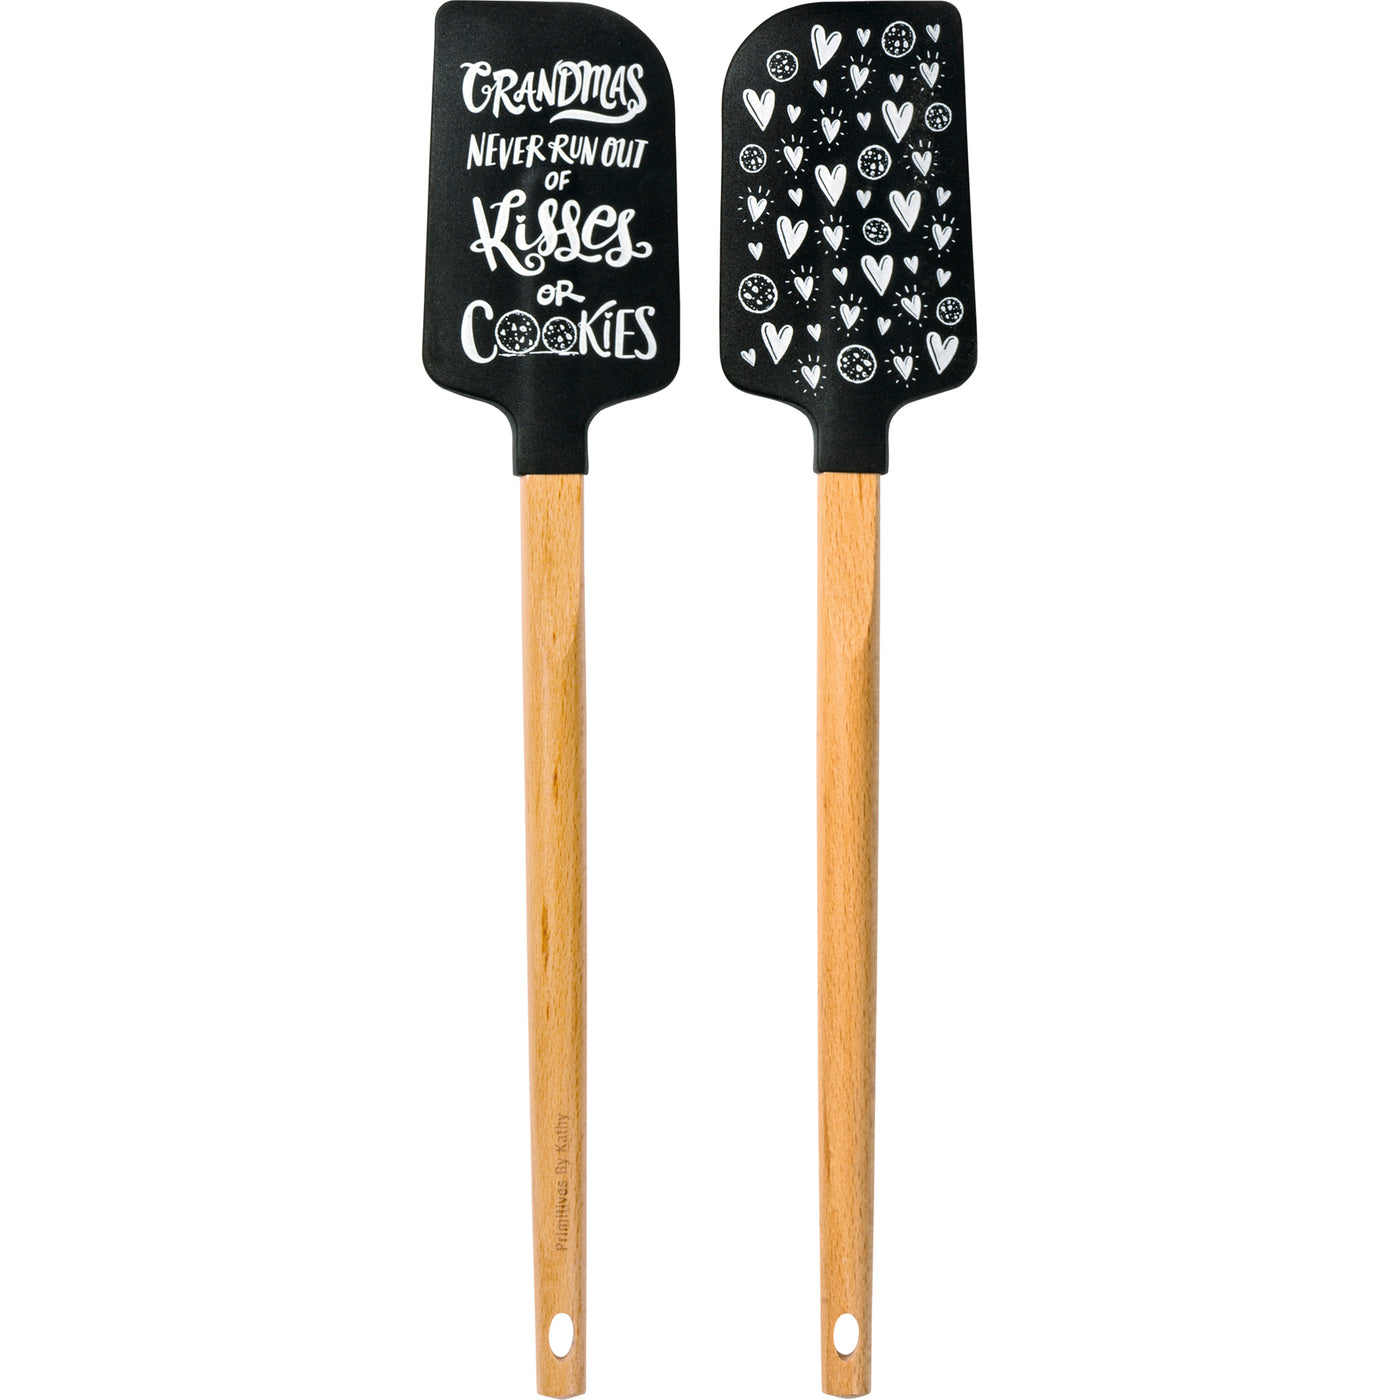 Grandma's Never Run Out of Kisses Or Cookies Spatula